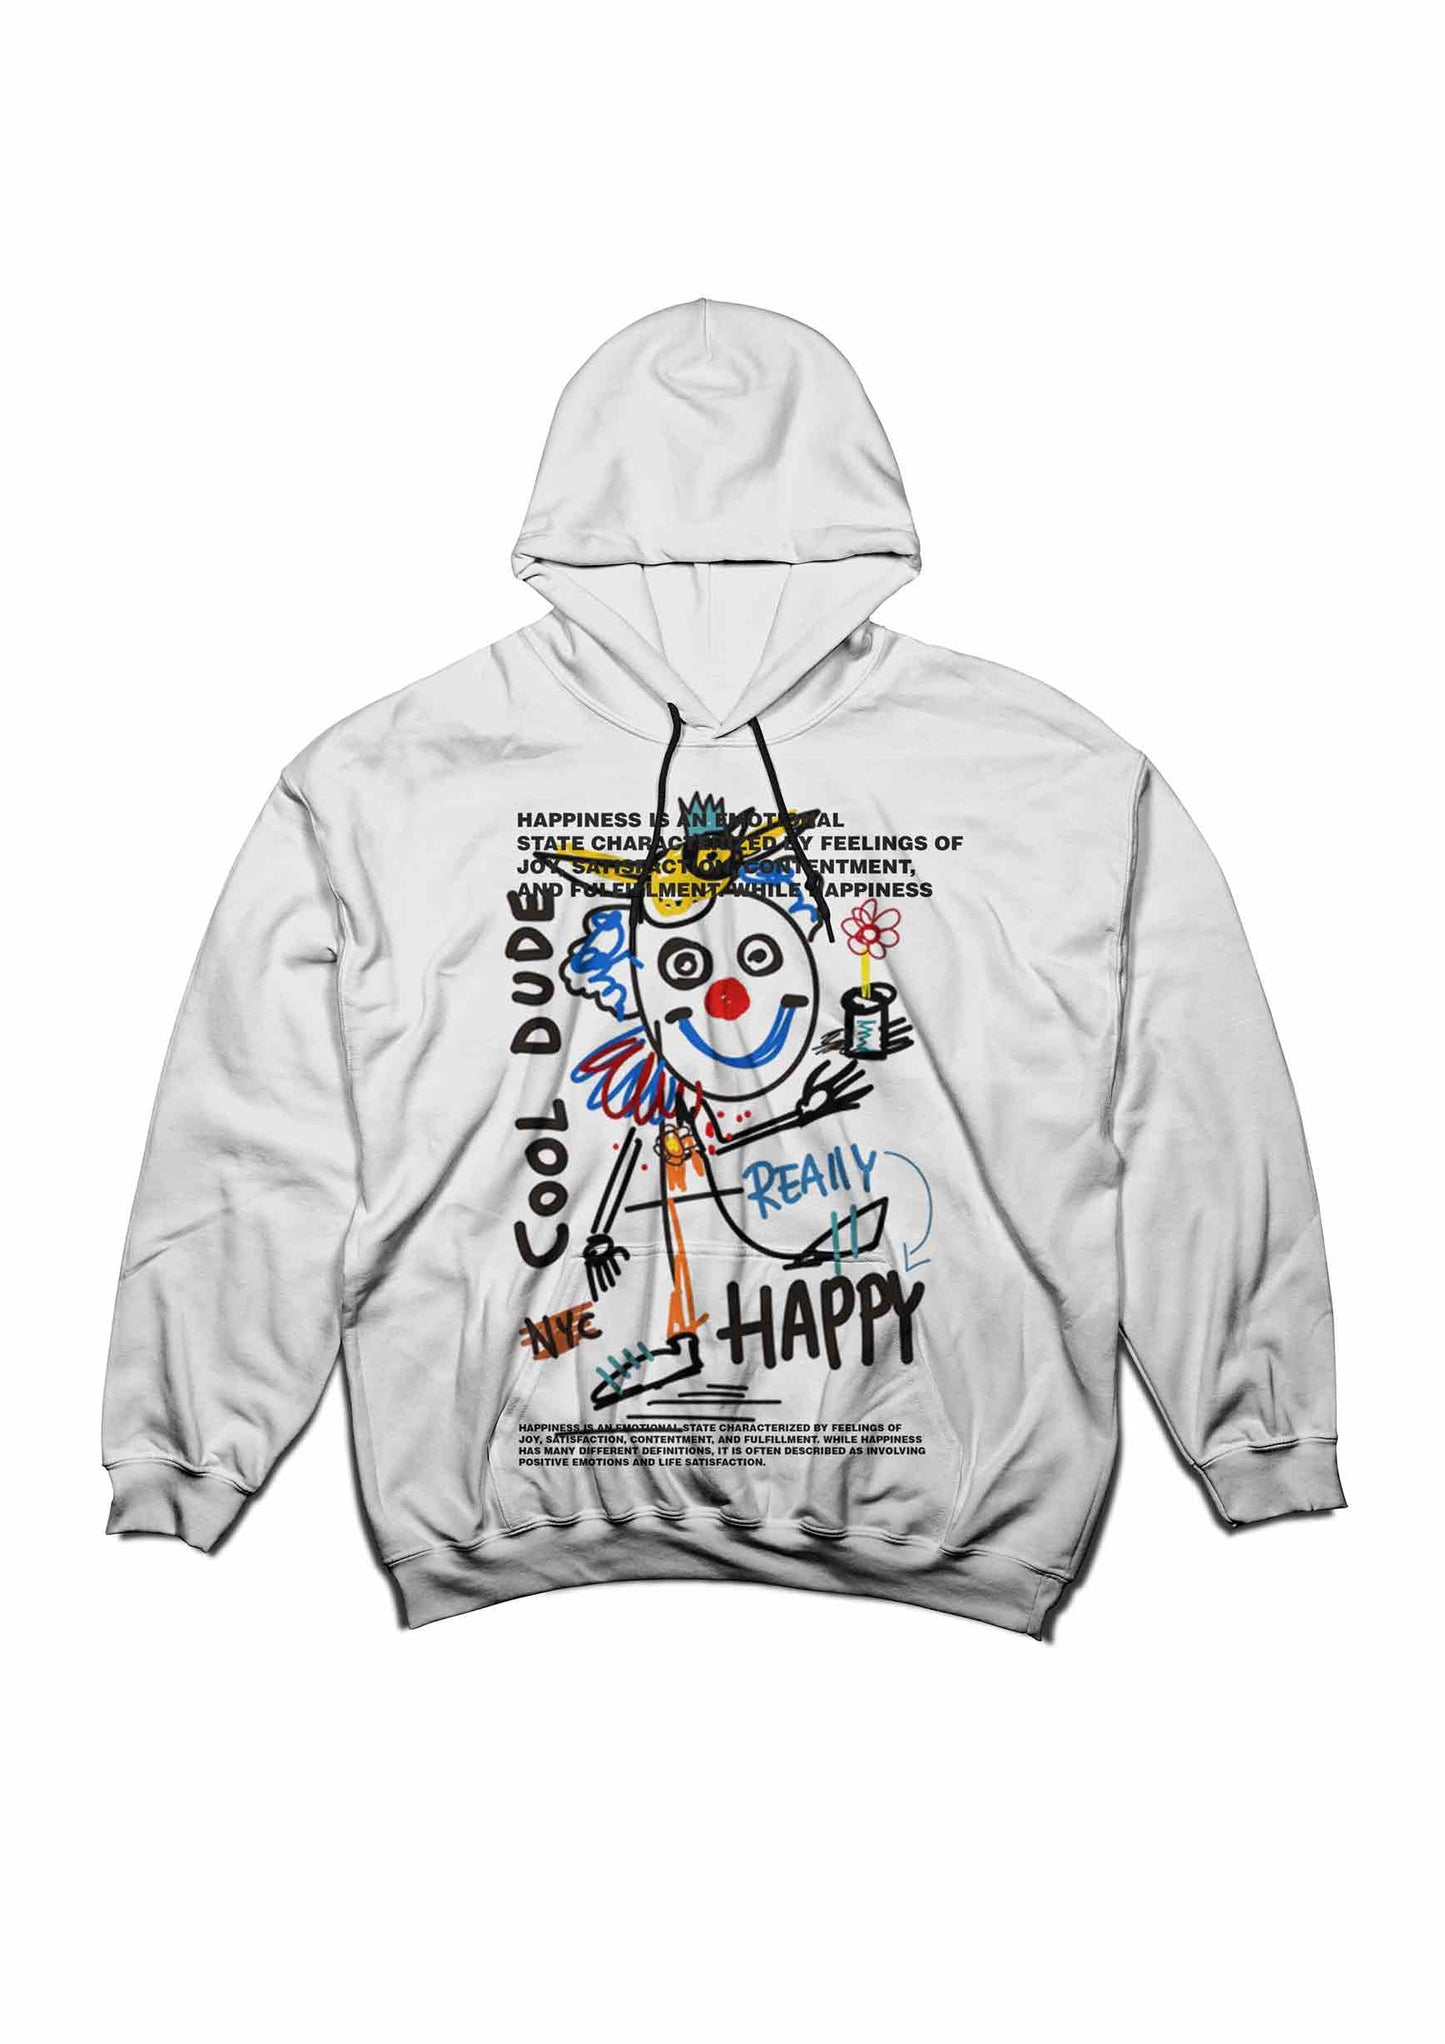 GOODTIMES® CLOTHING FULL COLLECTION